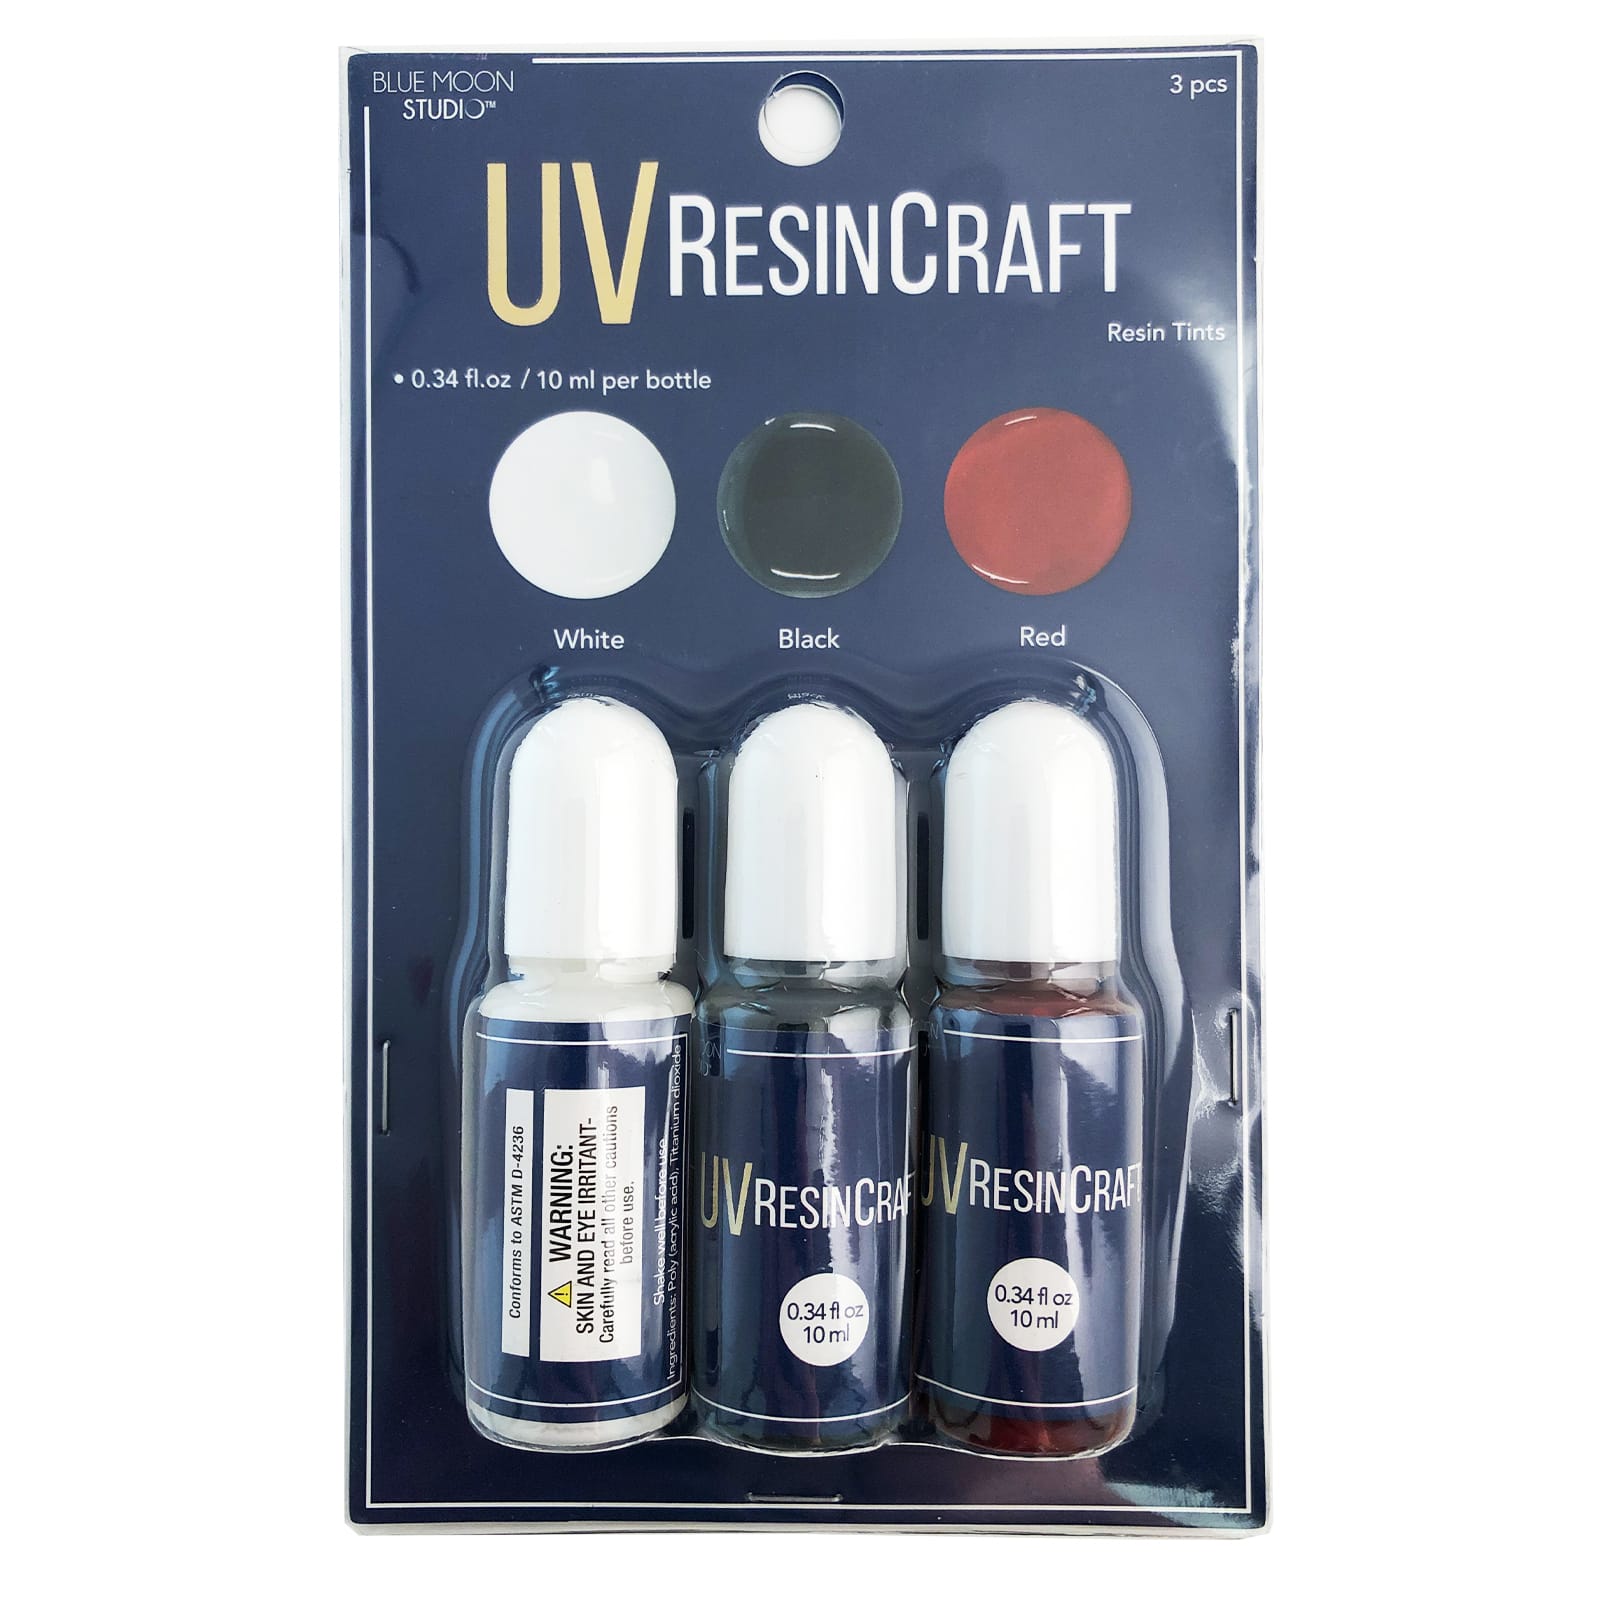 24 Color Resin Pigment Ink Set by Craft Smart | 0.33 | Michaels